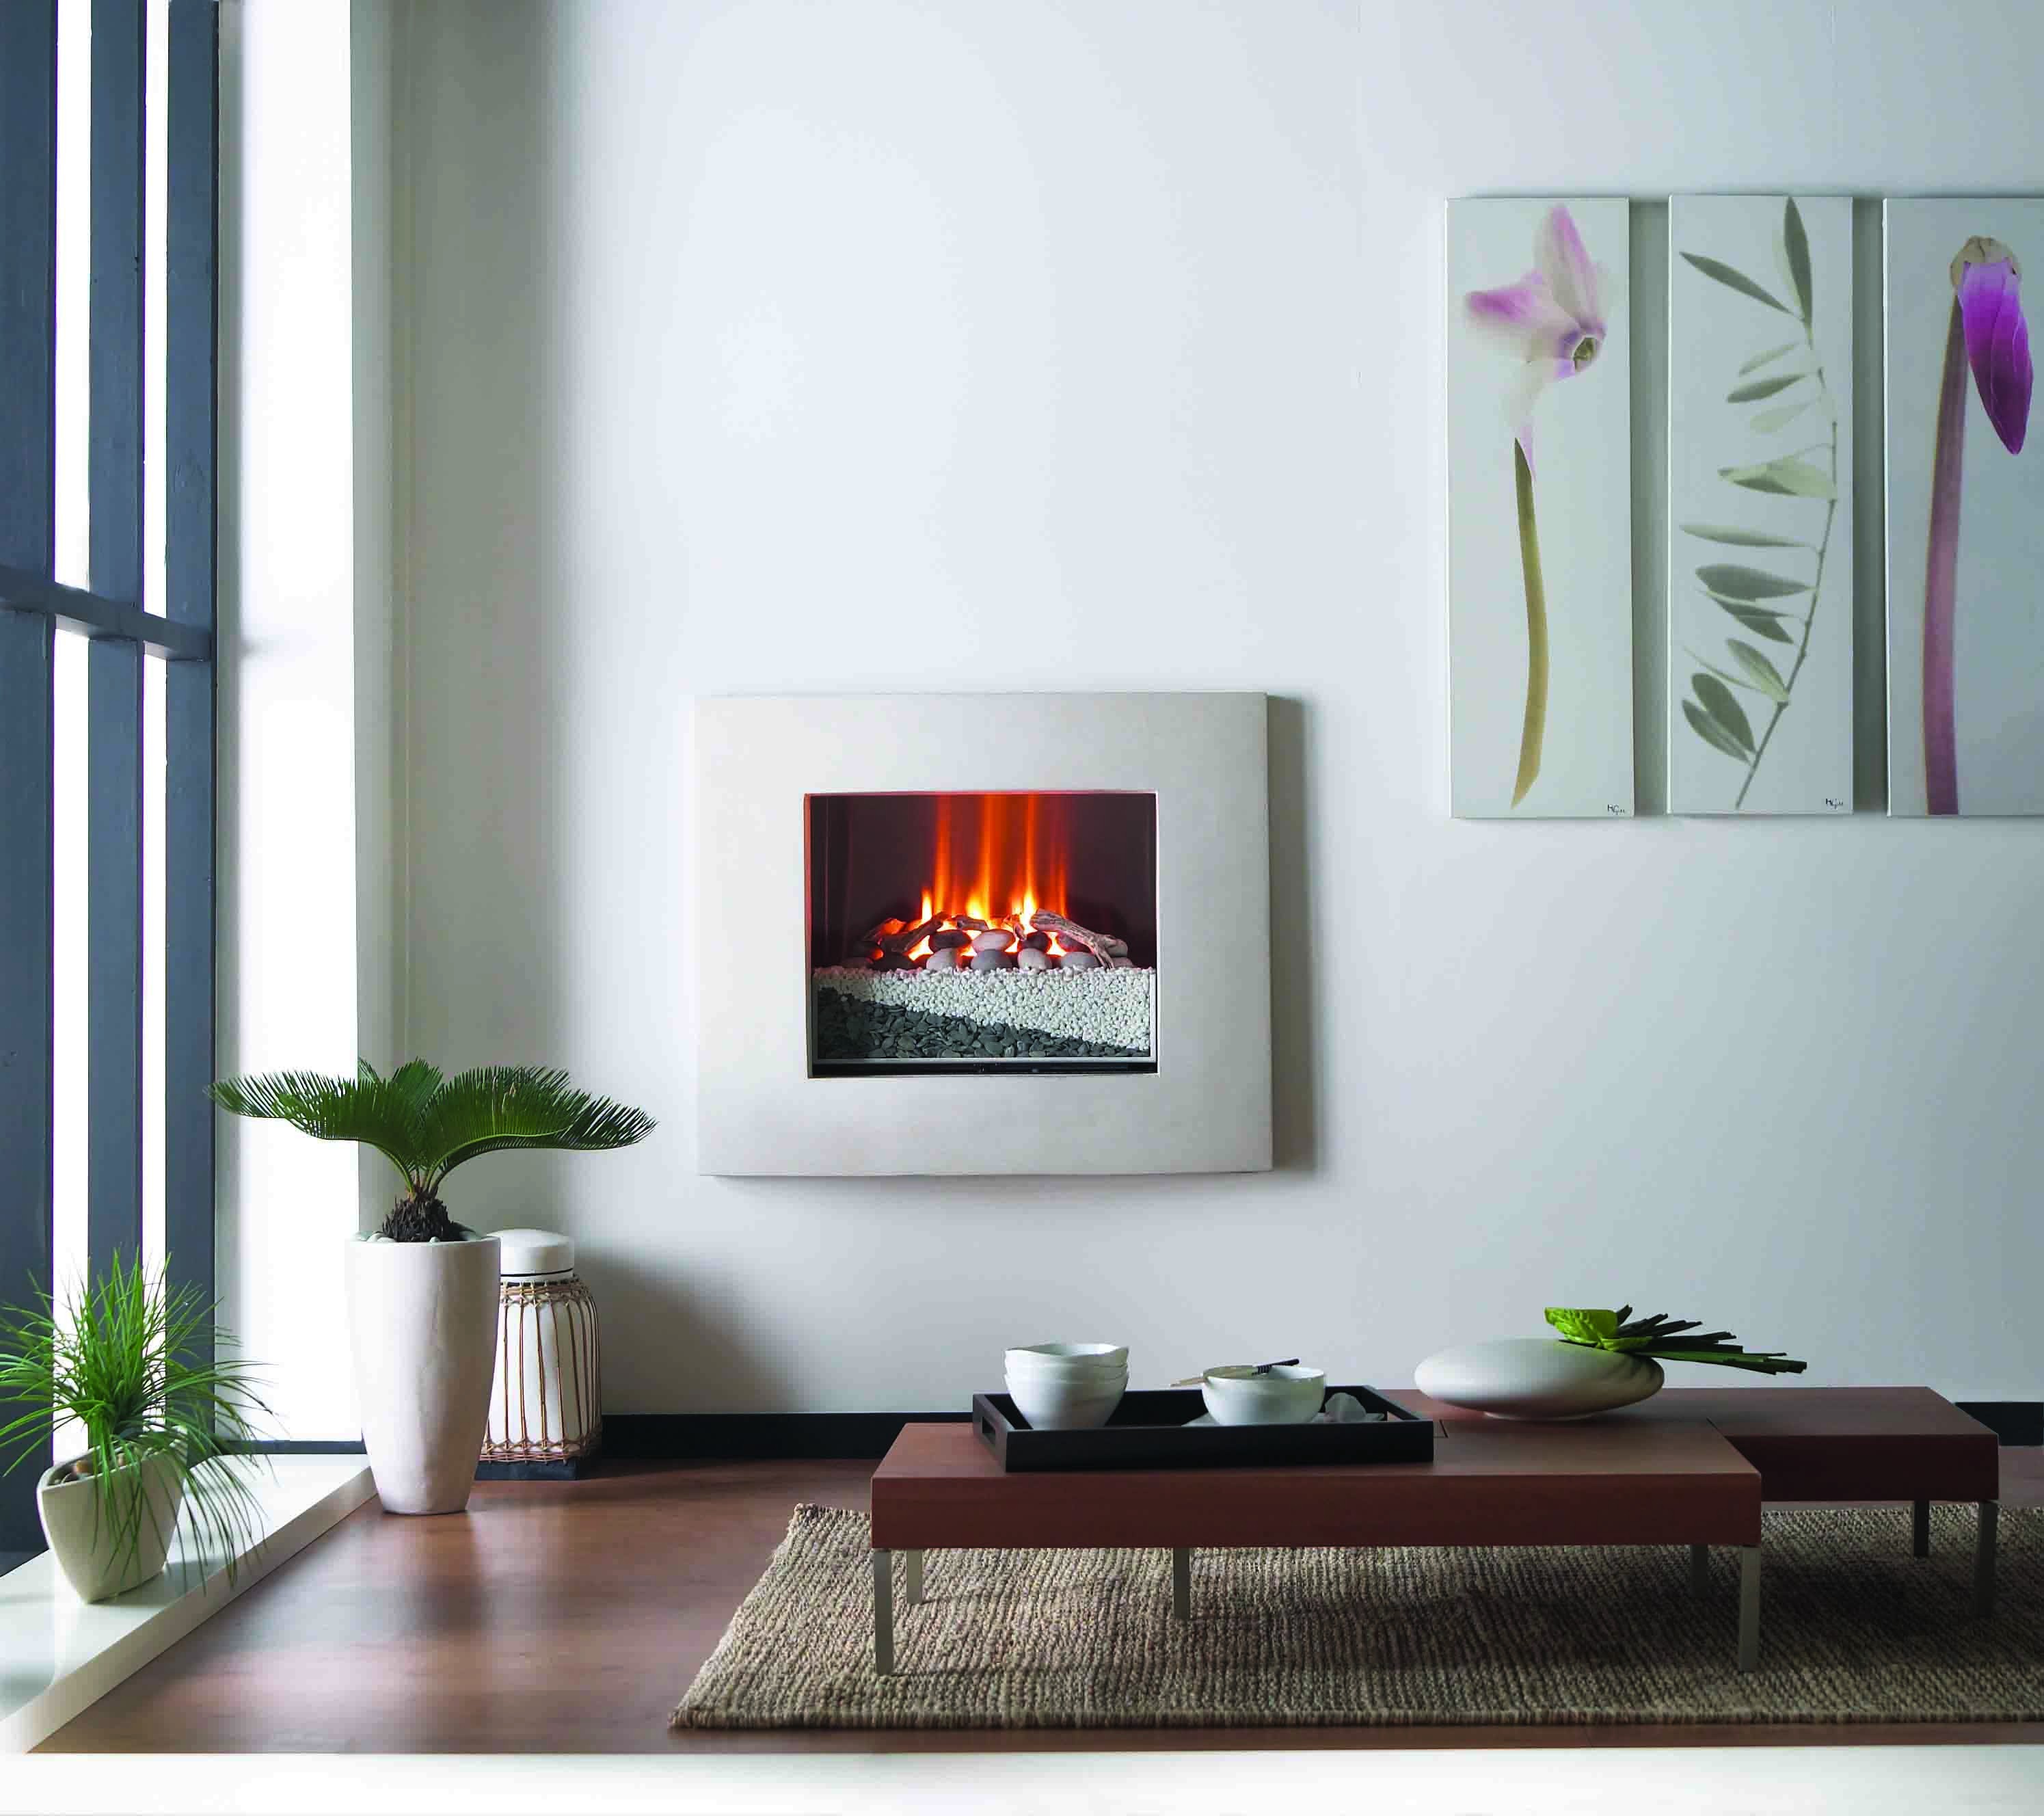 built-in electric fireplace in the apartment